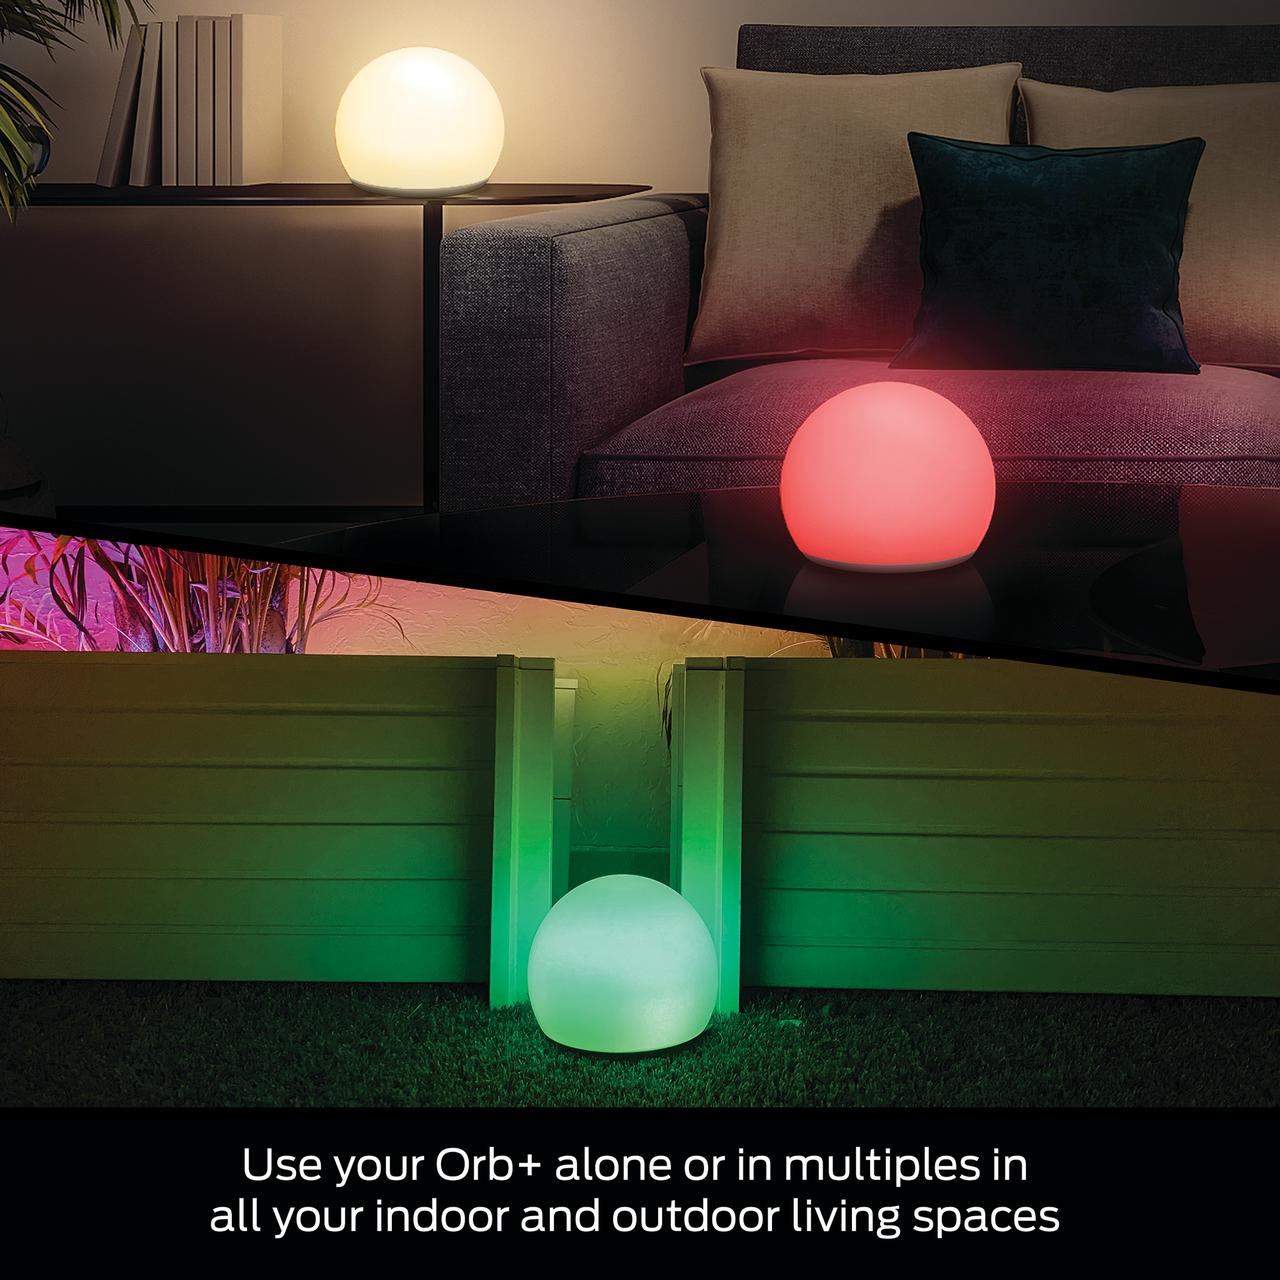 Monster LED 7-inch Orb Color Flow Smart Portable LED Light Ball, Indoor/Outdoor Use, Mobile App Control - image 3 of 6